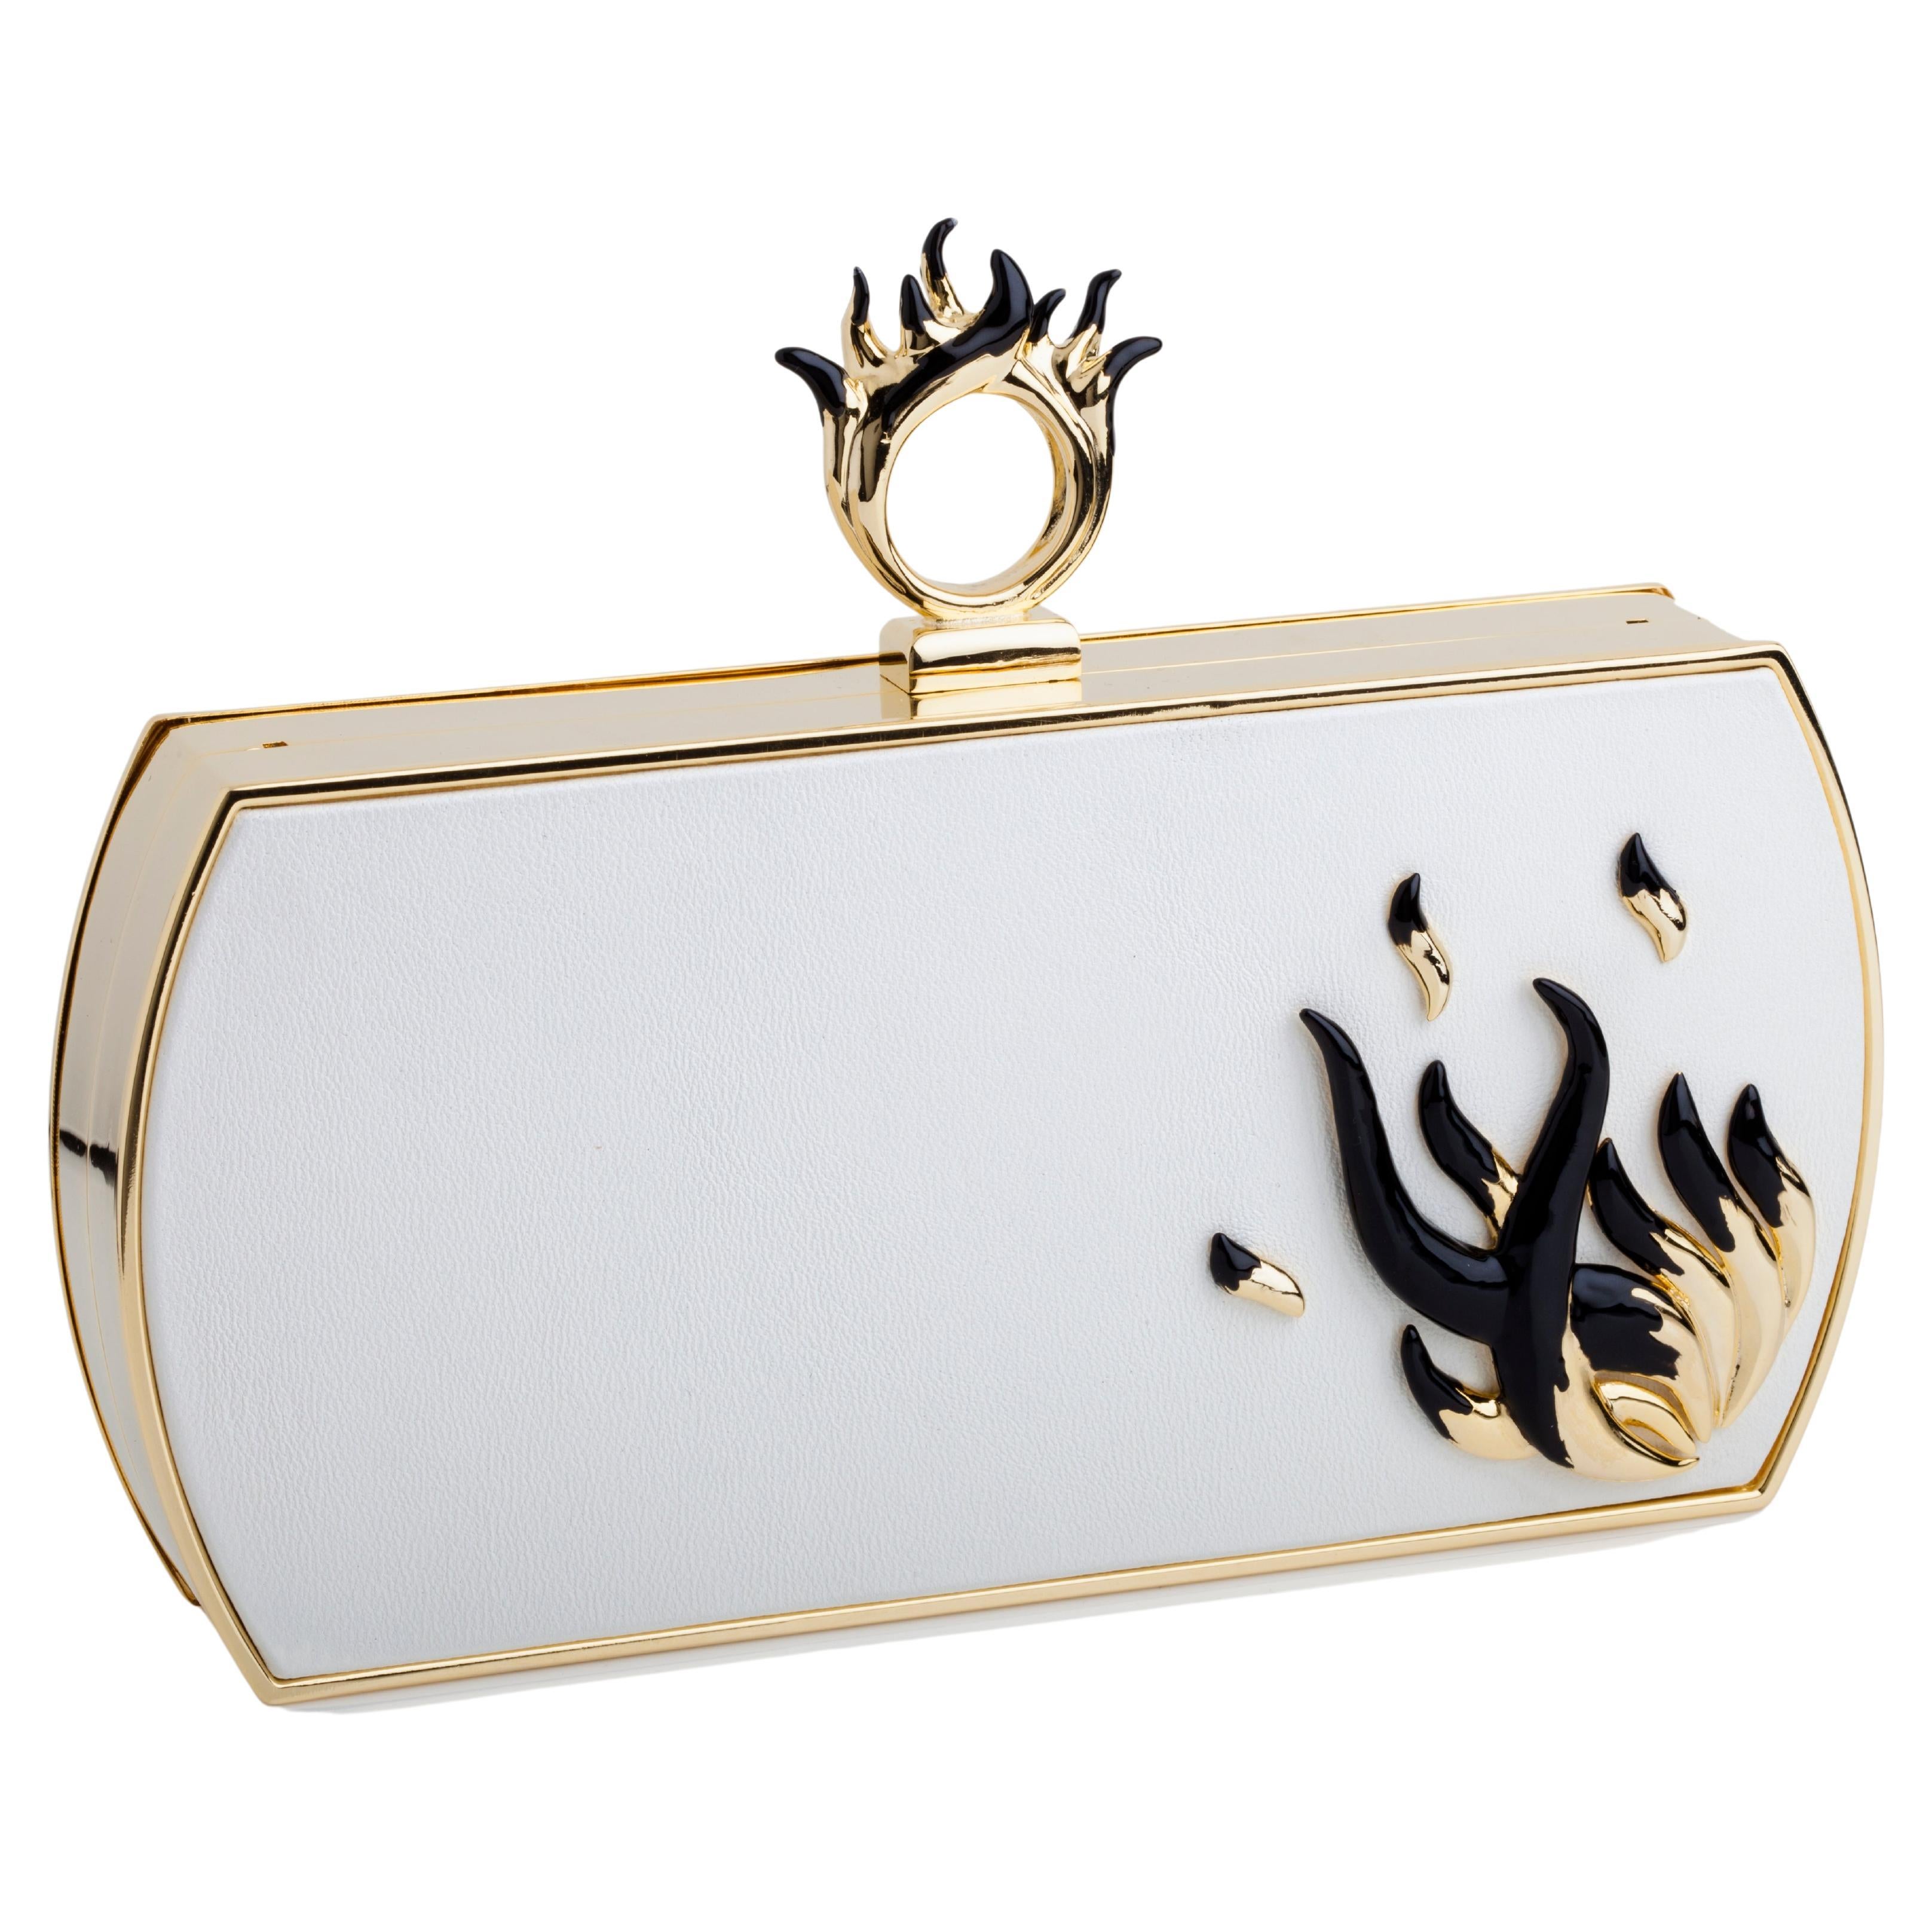 Bochic “Gilda” Collector Jeweled Limited Edition Clutch Made in Italy 